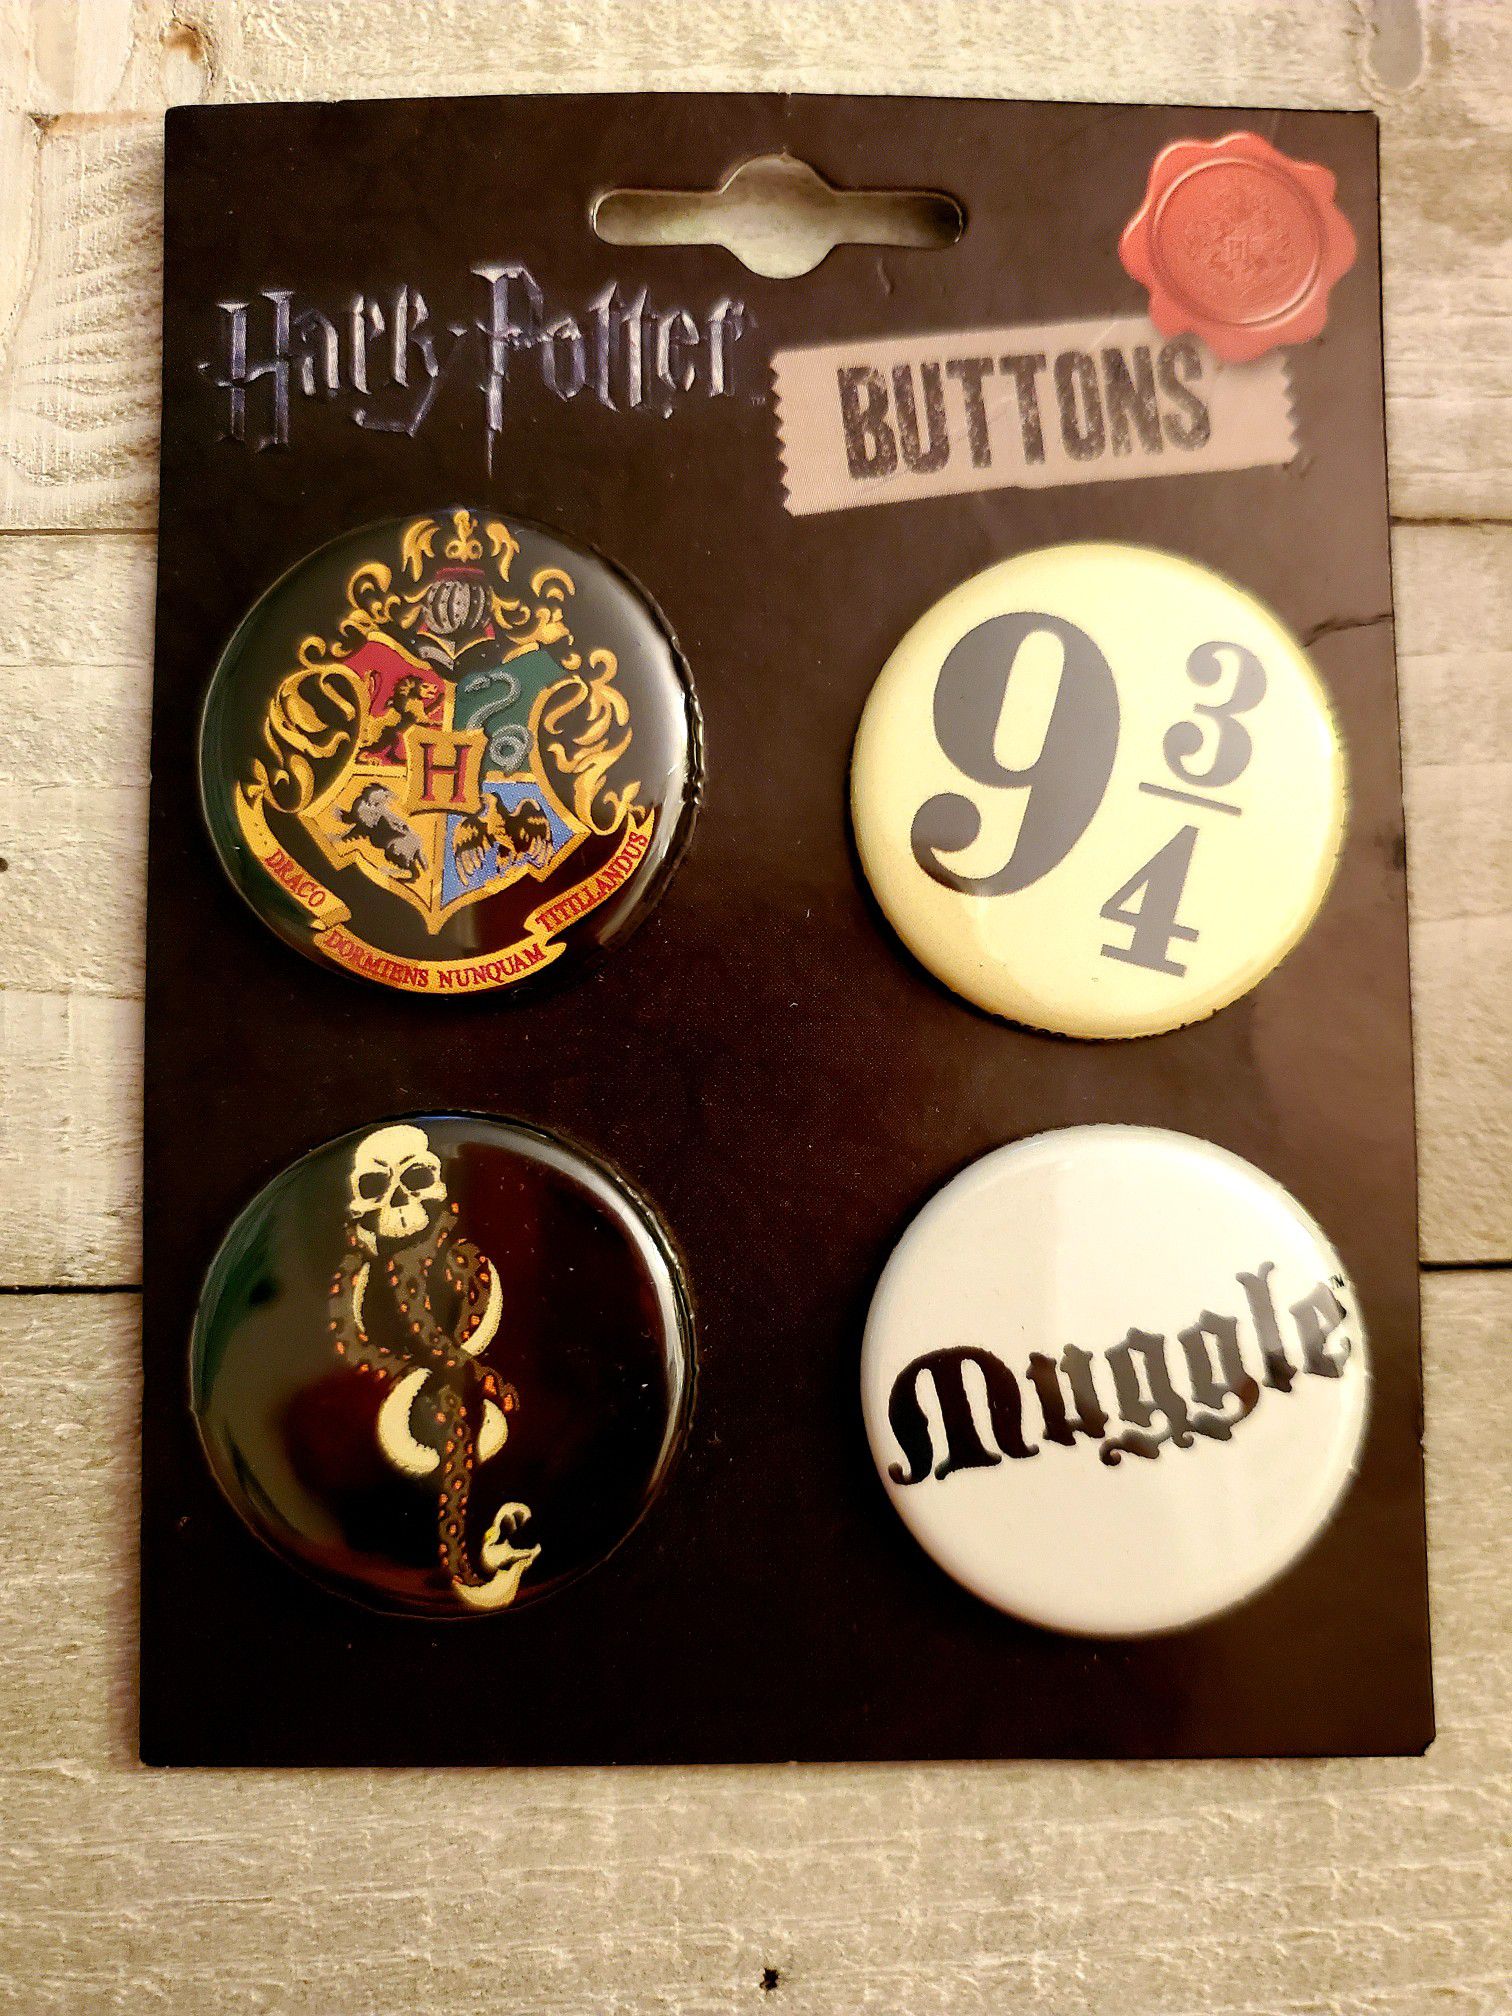 Harry Potter buttons